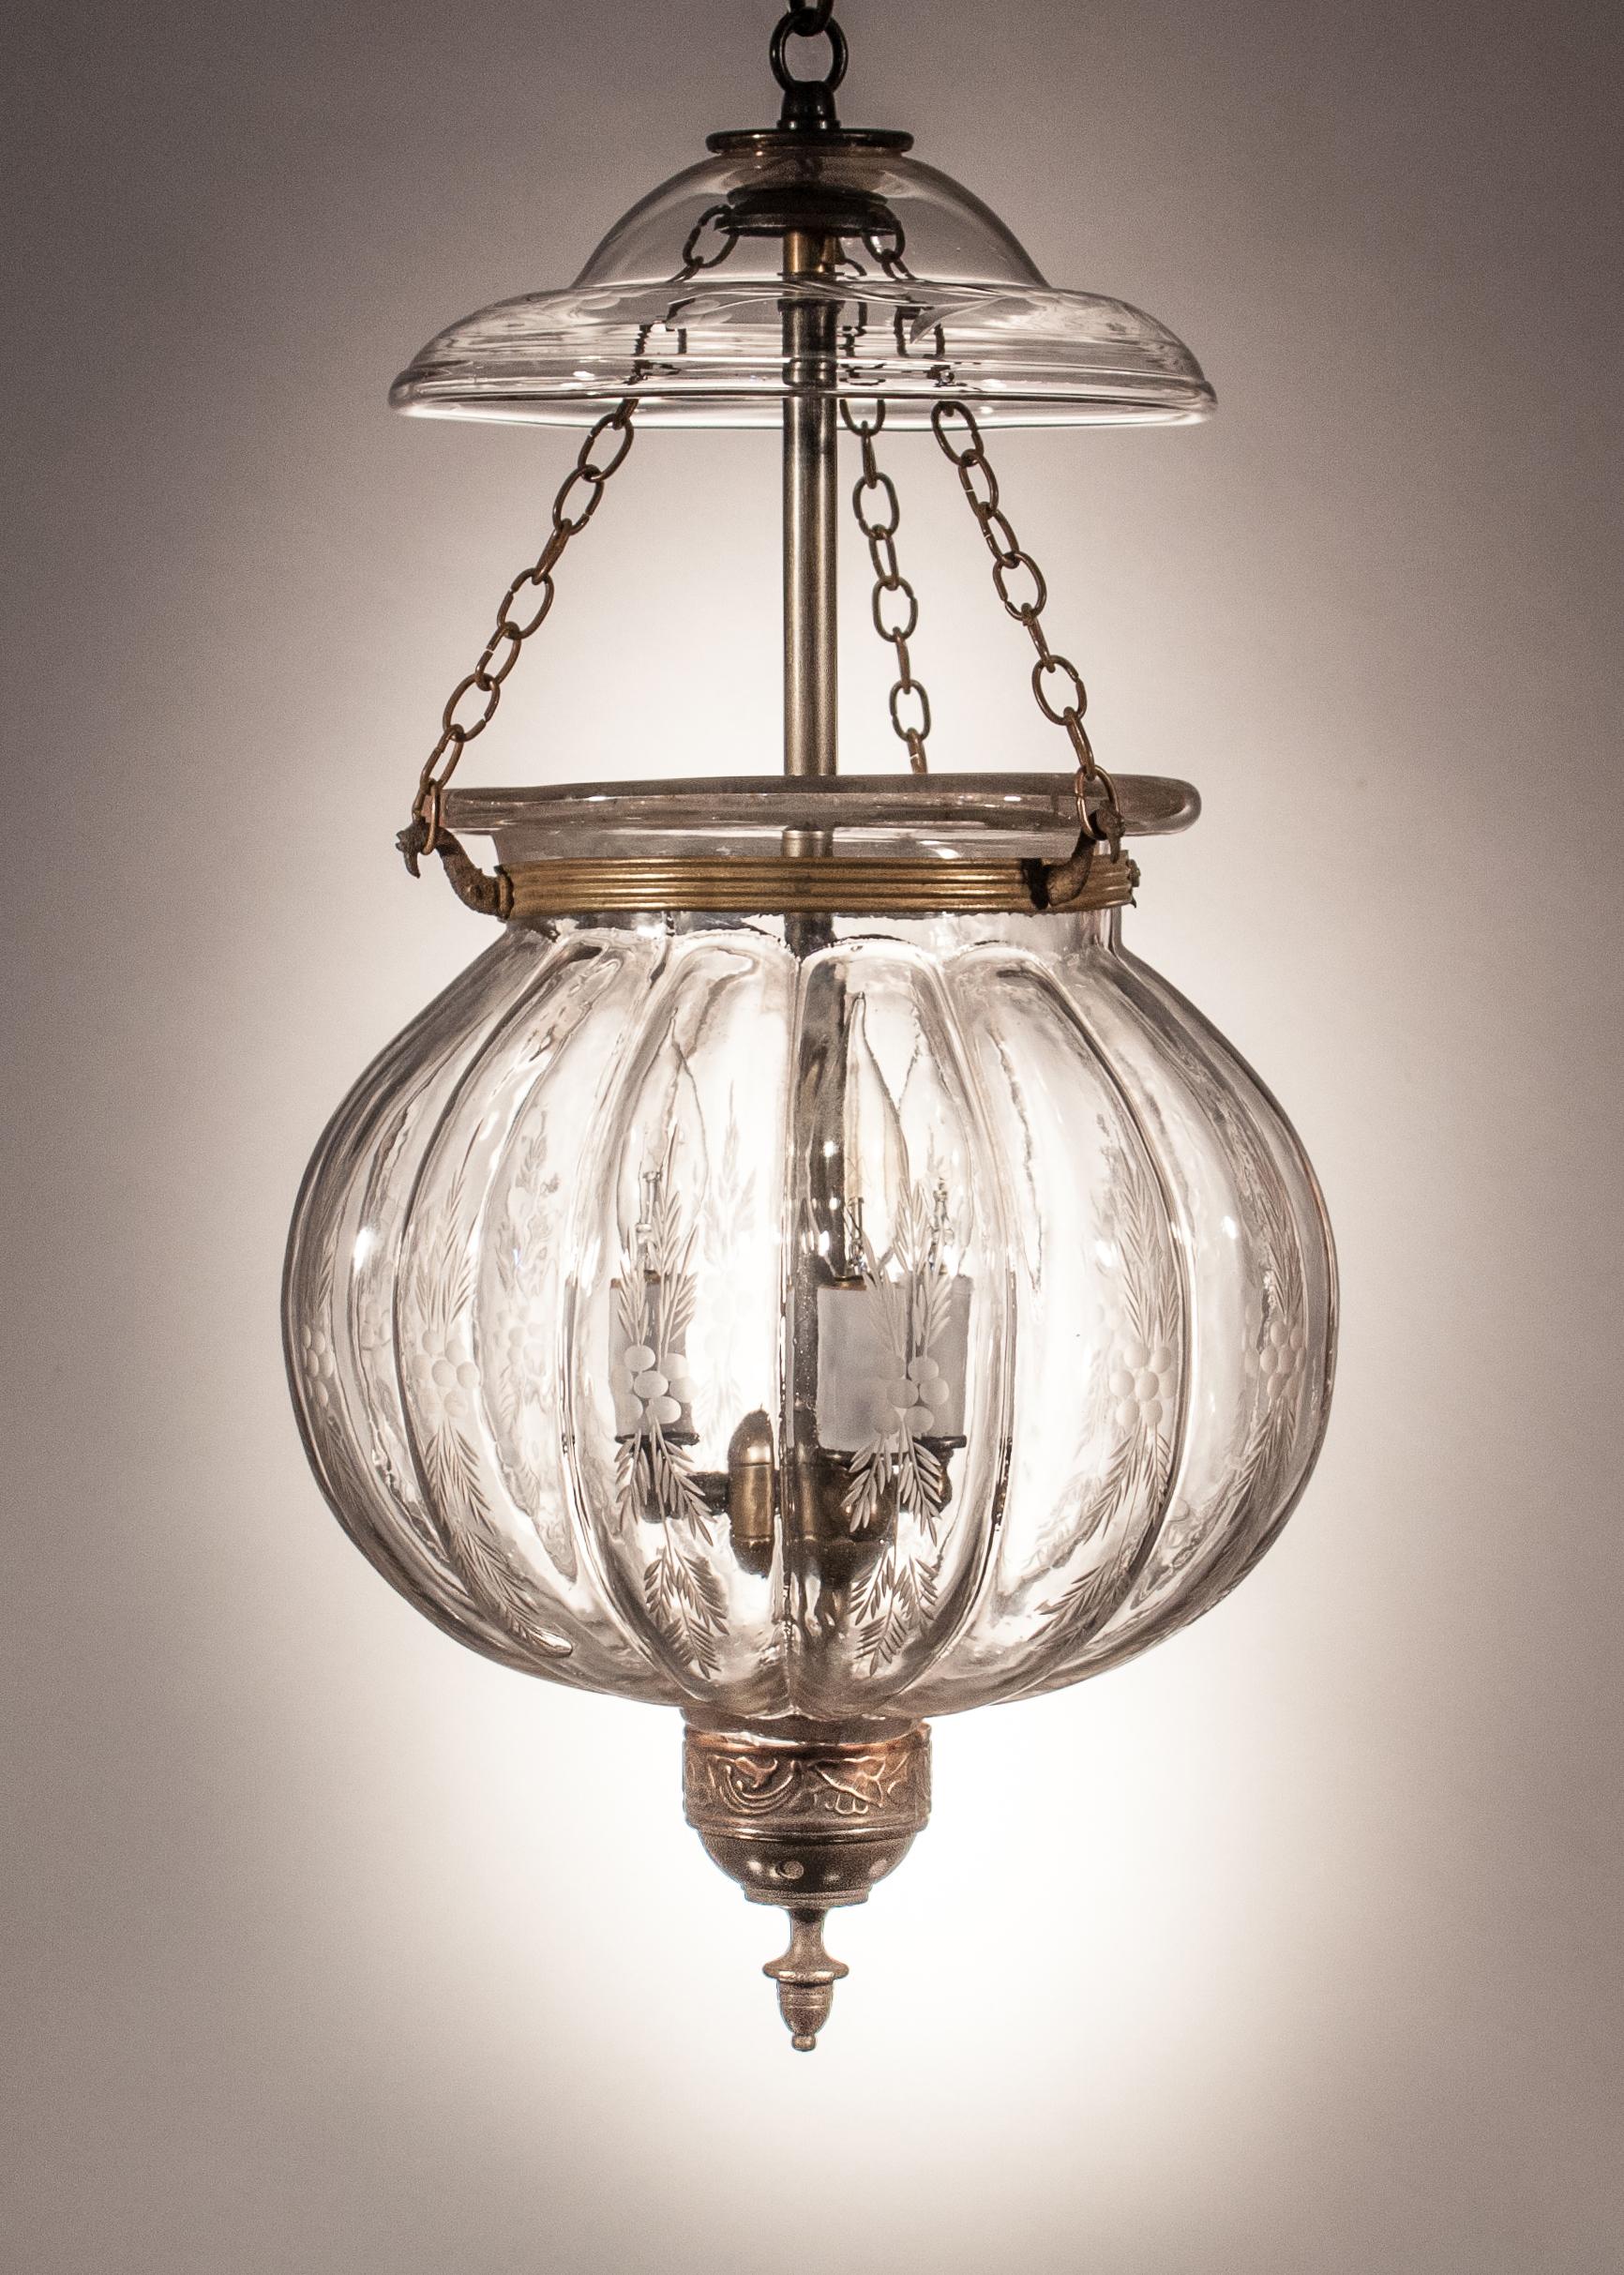 An exceptional melon or pumpkin bell jar lantern with wheat etching manufactured by Val St. Lambert, Belgium. This rare circa 1890 lantern features all-original fittings, including its pressed smoke bell/lid with a complementary etching, rolled